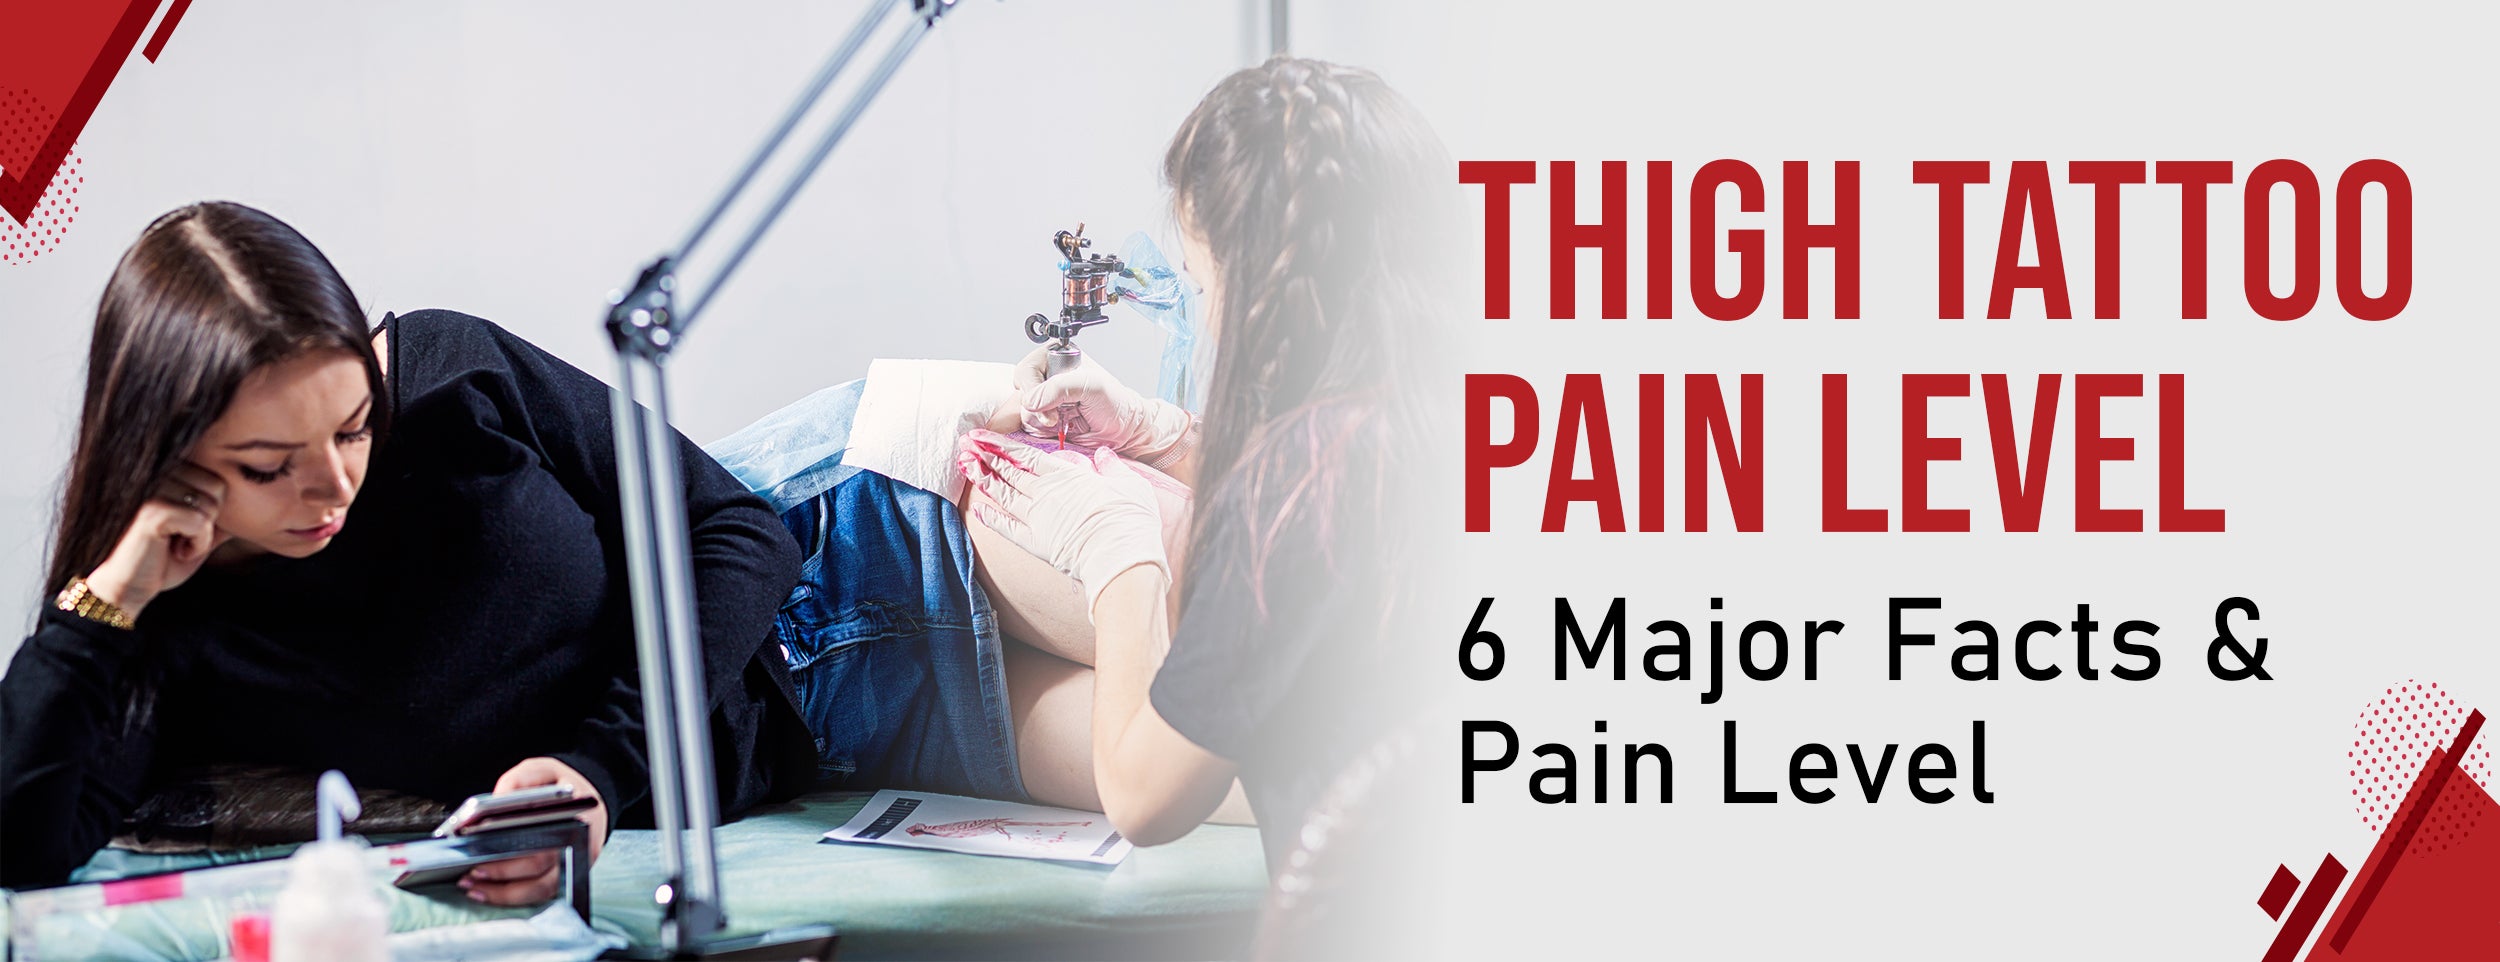 On the Tattoo Pain Scale, want to know if YOUR ink will rate high or low?